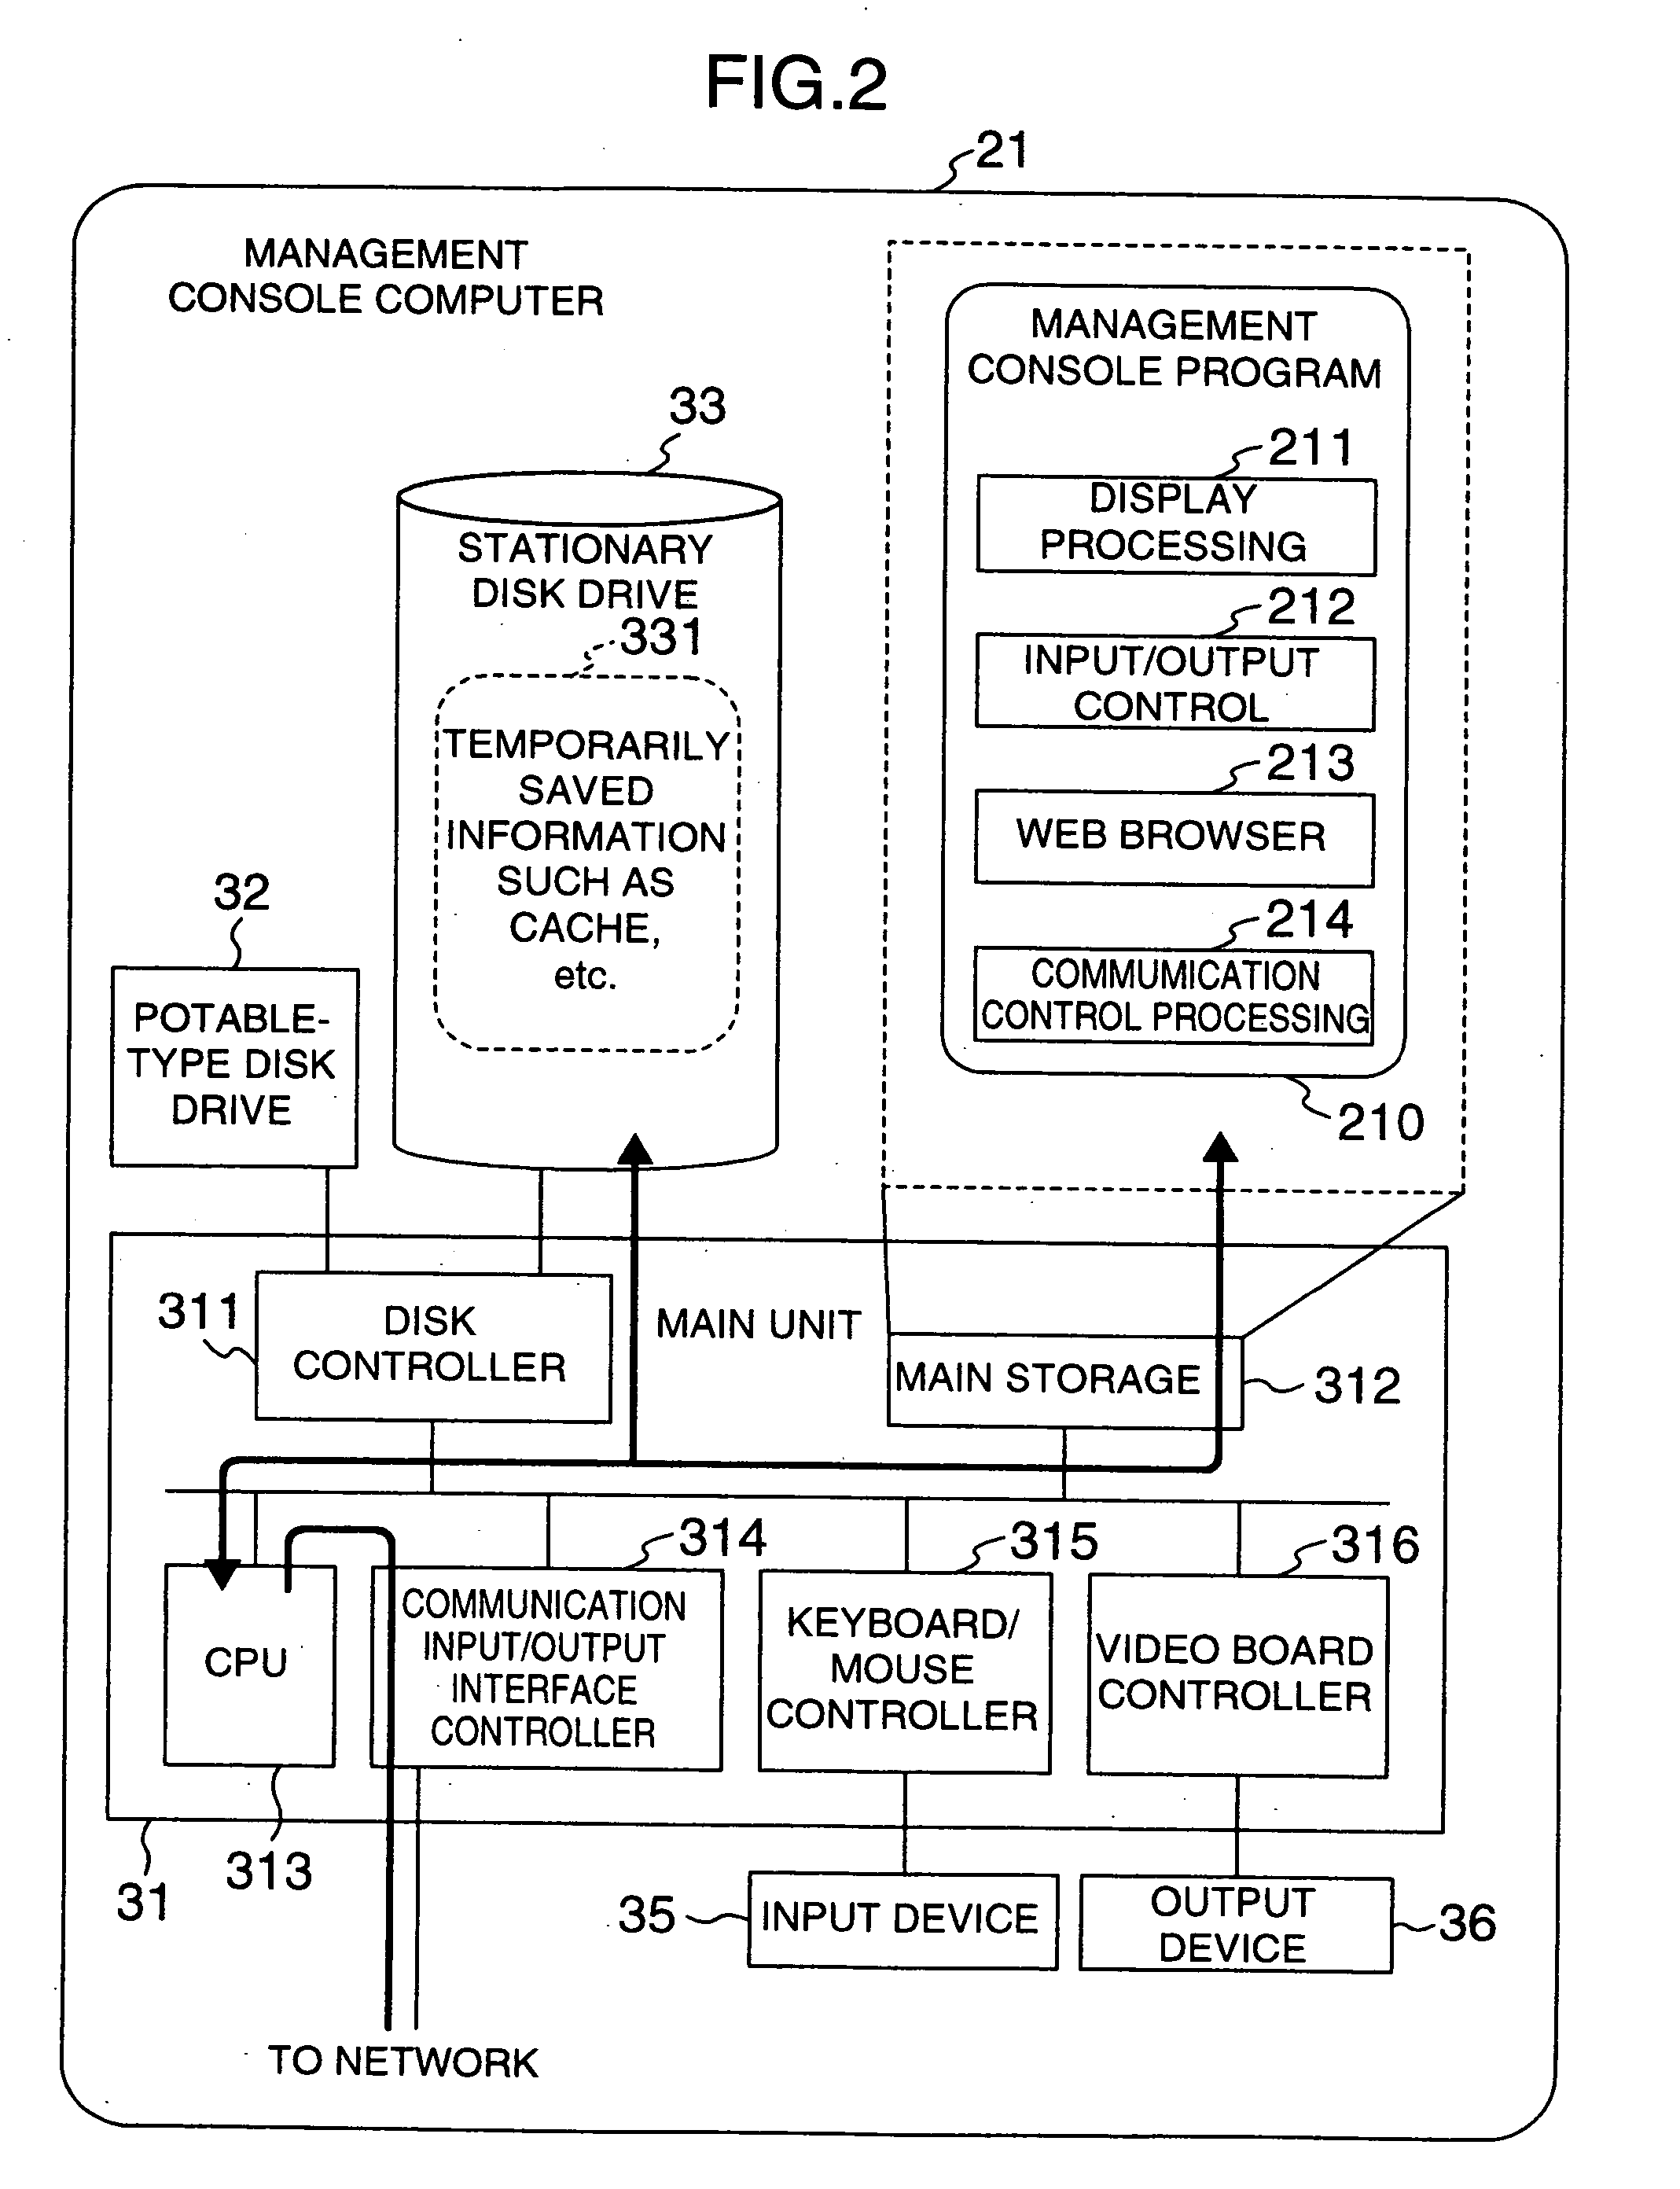 Network management system having a network including virtual networks